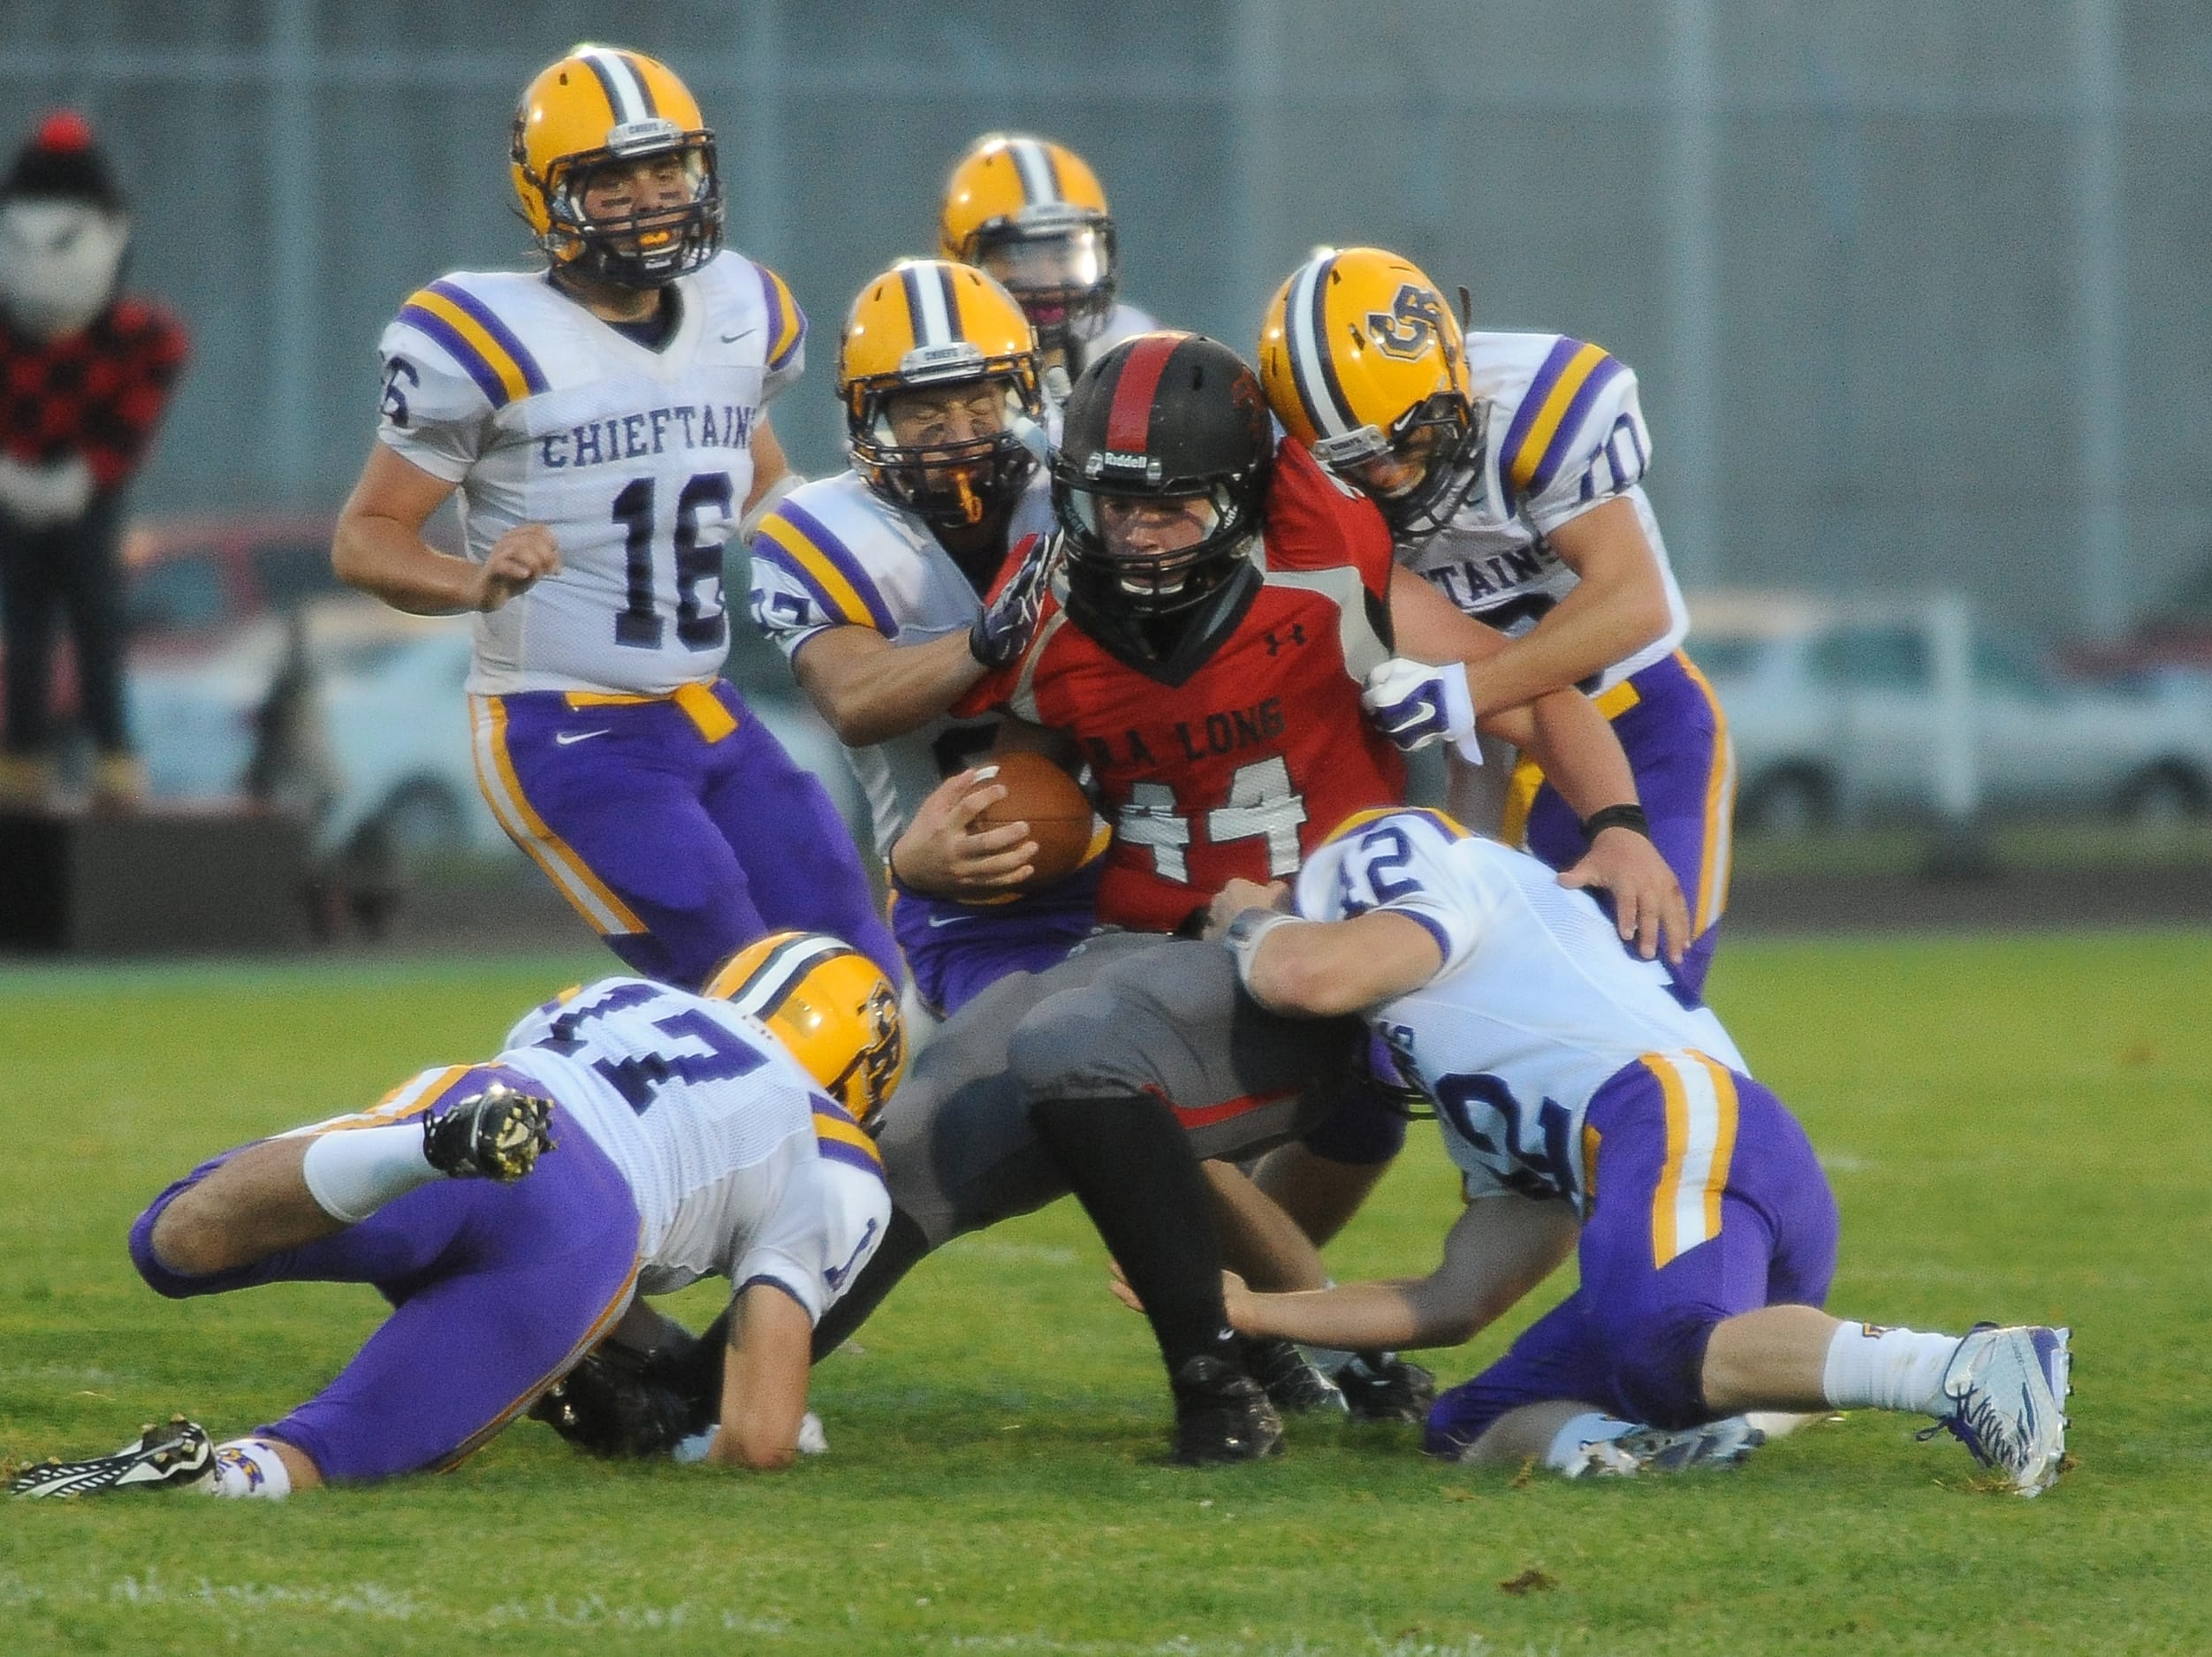 R.A. Long running back Gunnar Blix is tackled by Columbia River players during the first half Thursday in Longview.